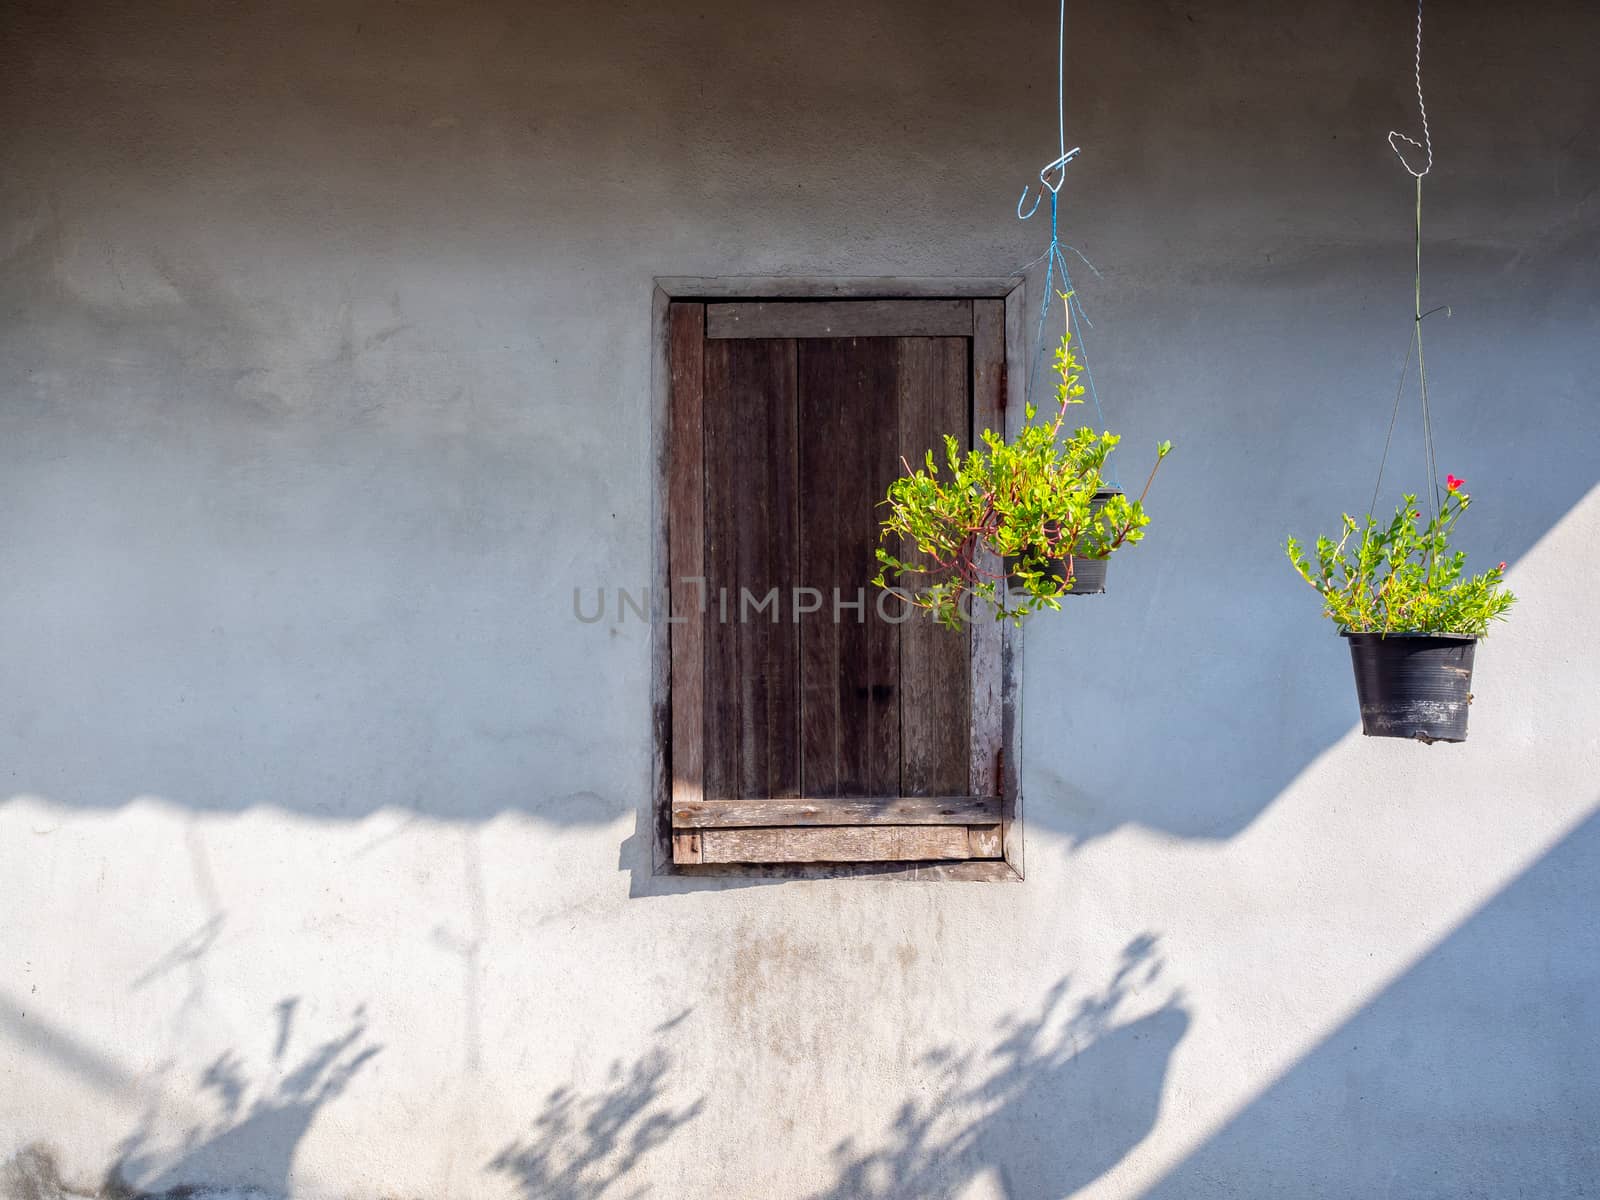 Concrete wall background, ornamental hanging plant and old wooden window on concrete wall in local style.